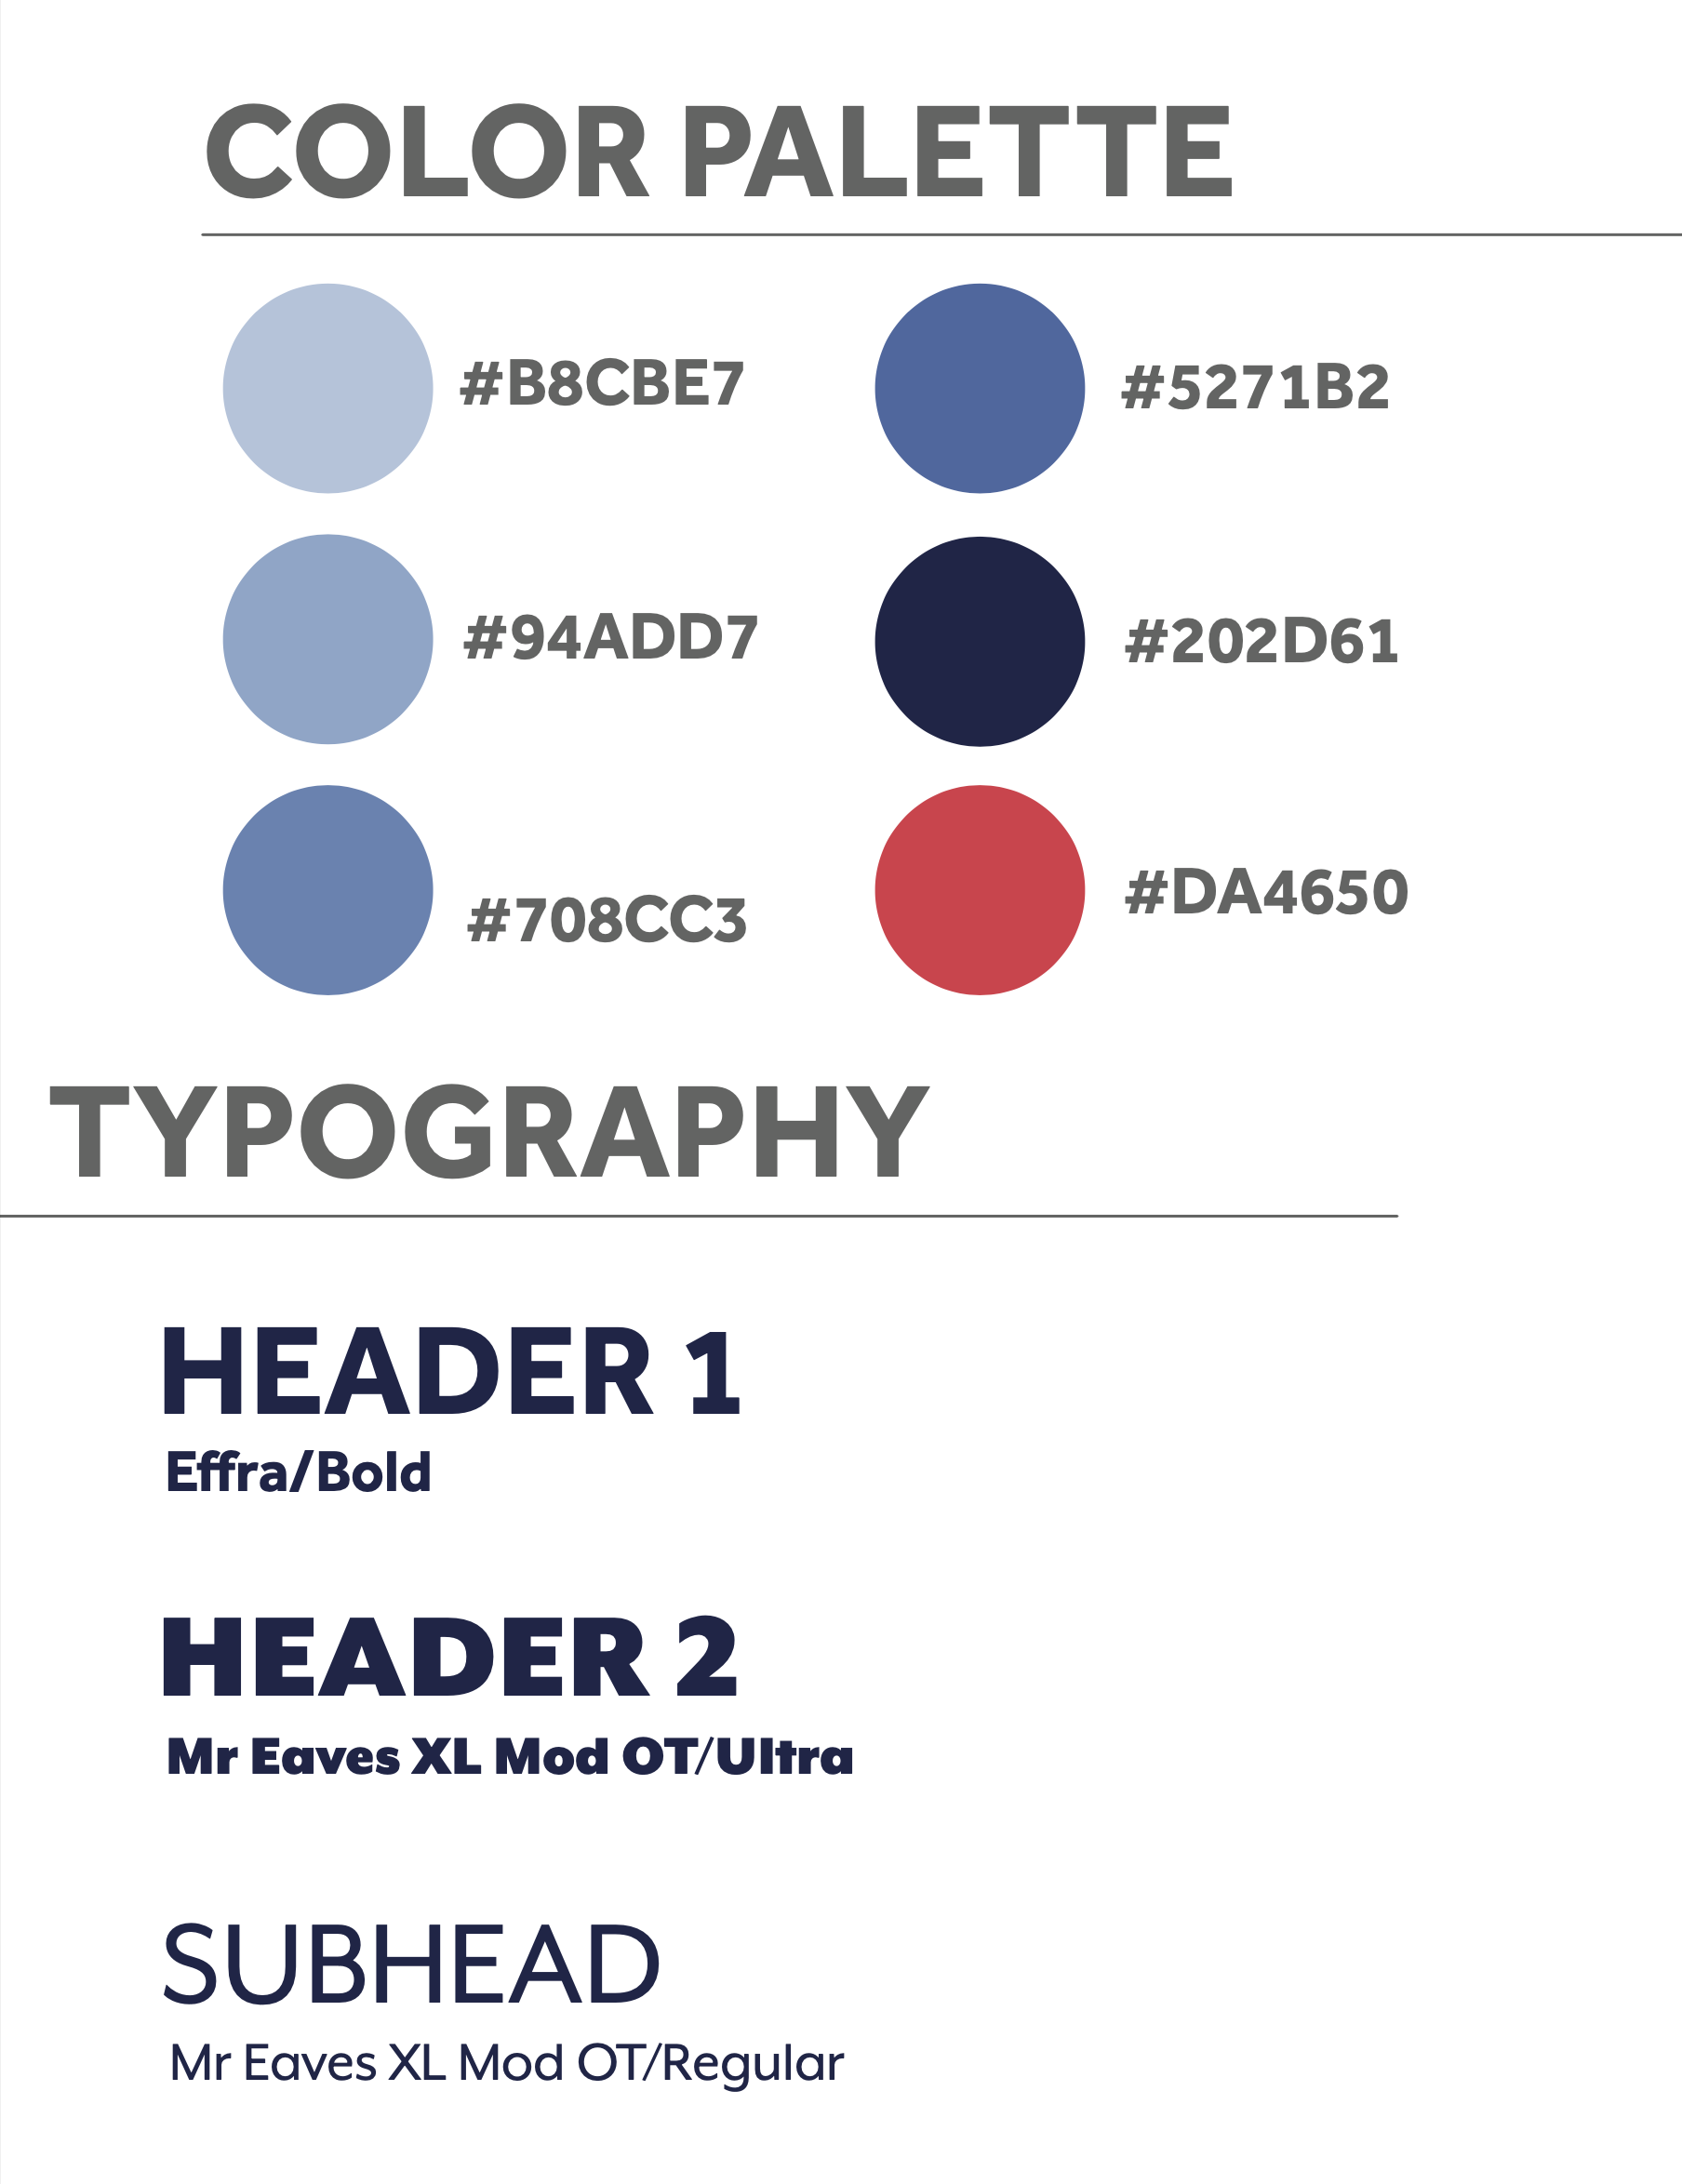 OSCC style guide for color palette and typography